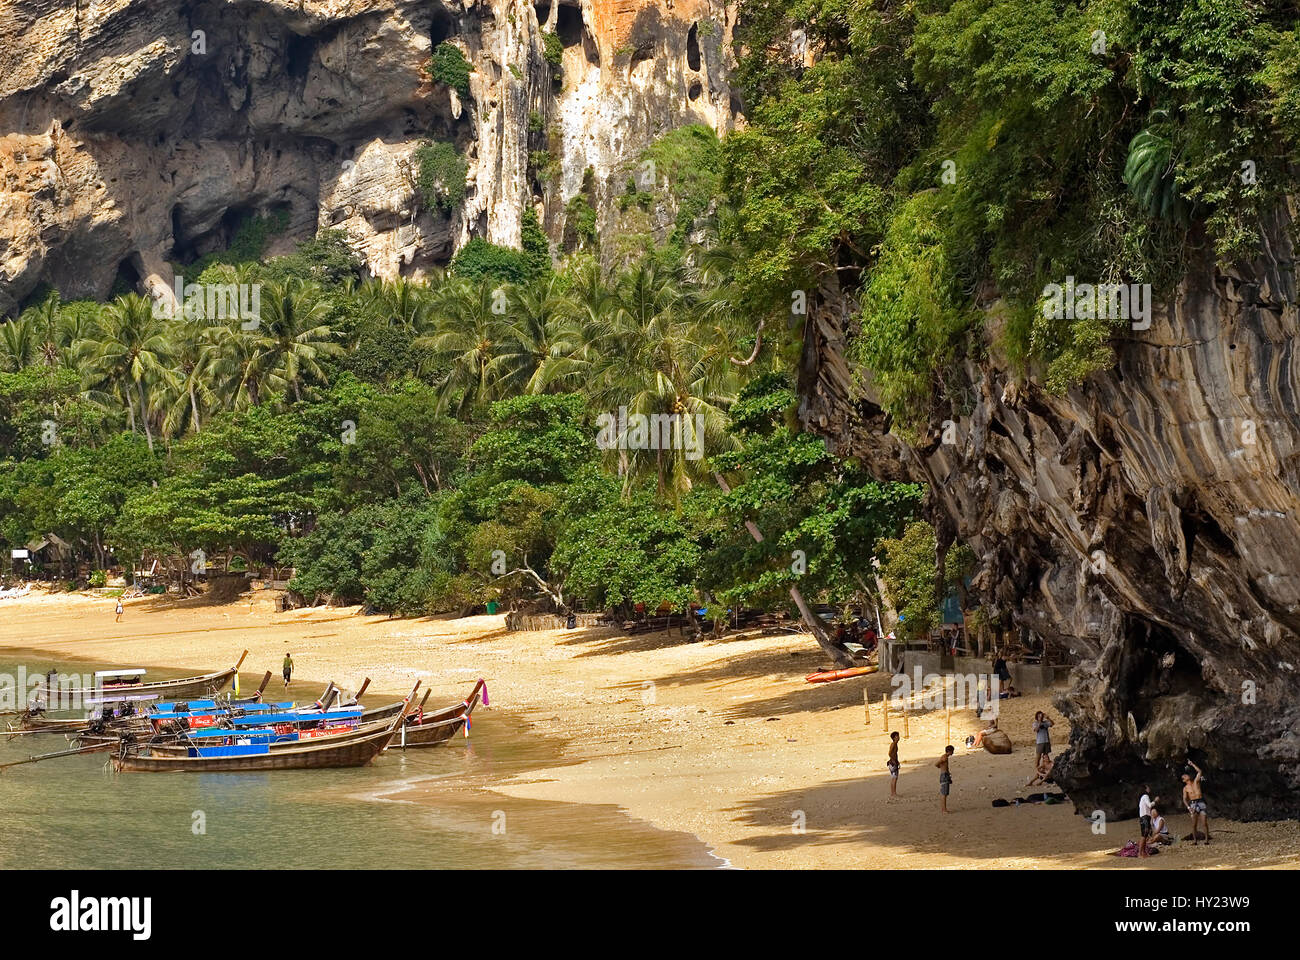 Stock Photo of a Thai Tourist Boats at the beach of Ton Sai Beach in tha Andaman Sea near Krabi. In the foreground of the image you see mountain climb Stock Photo